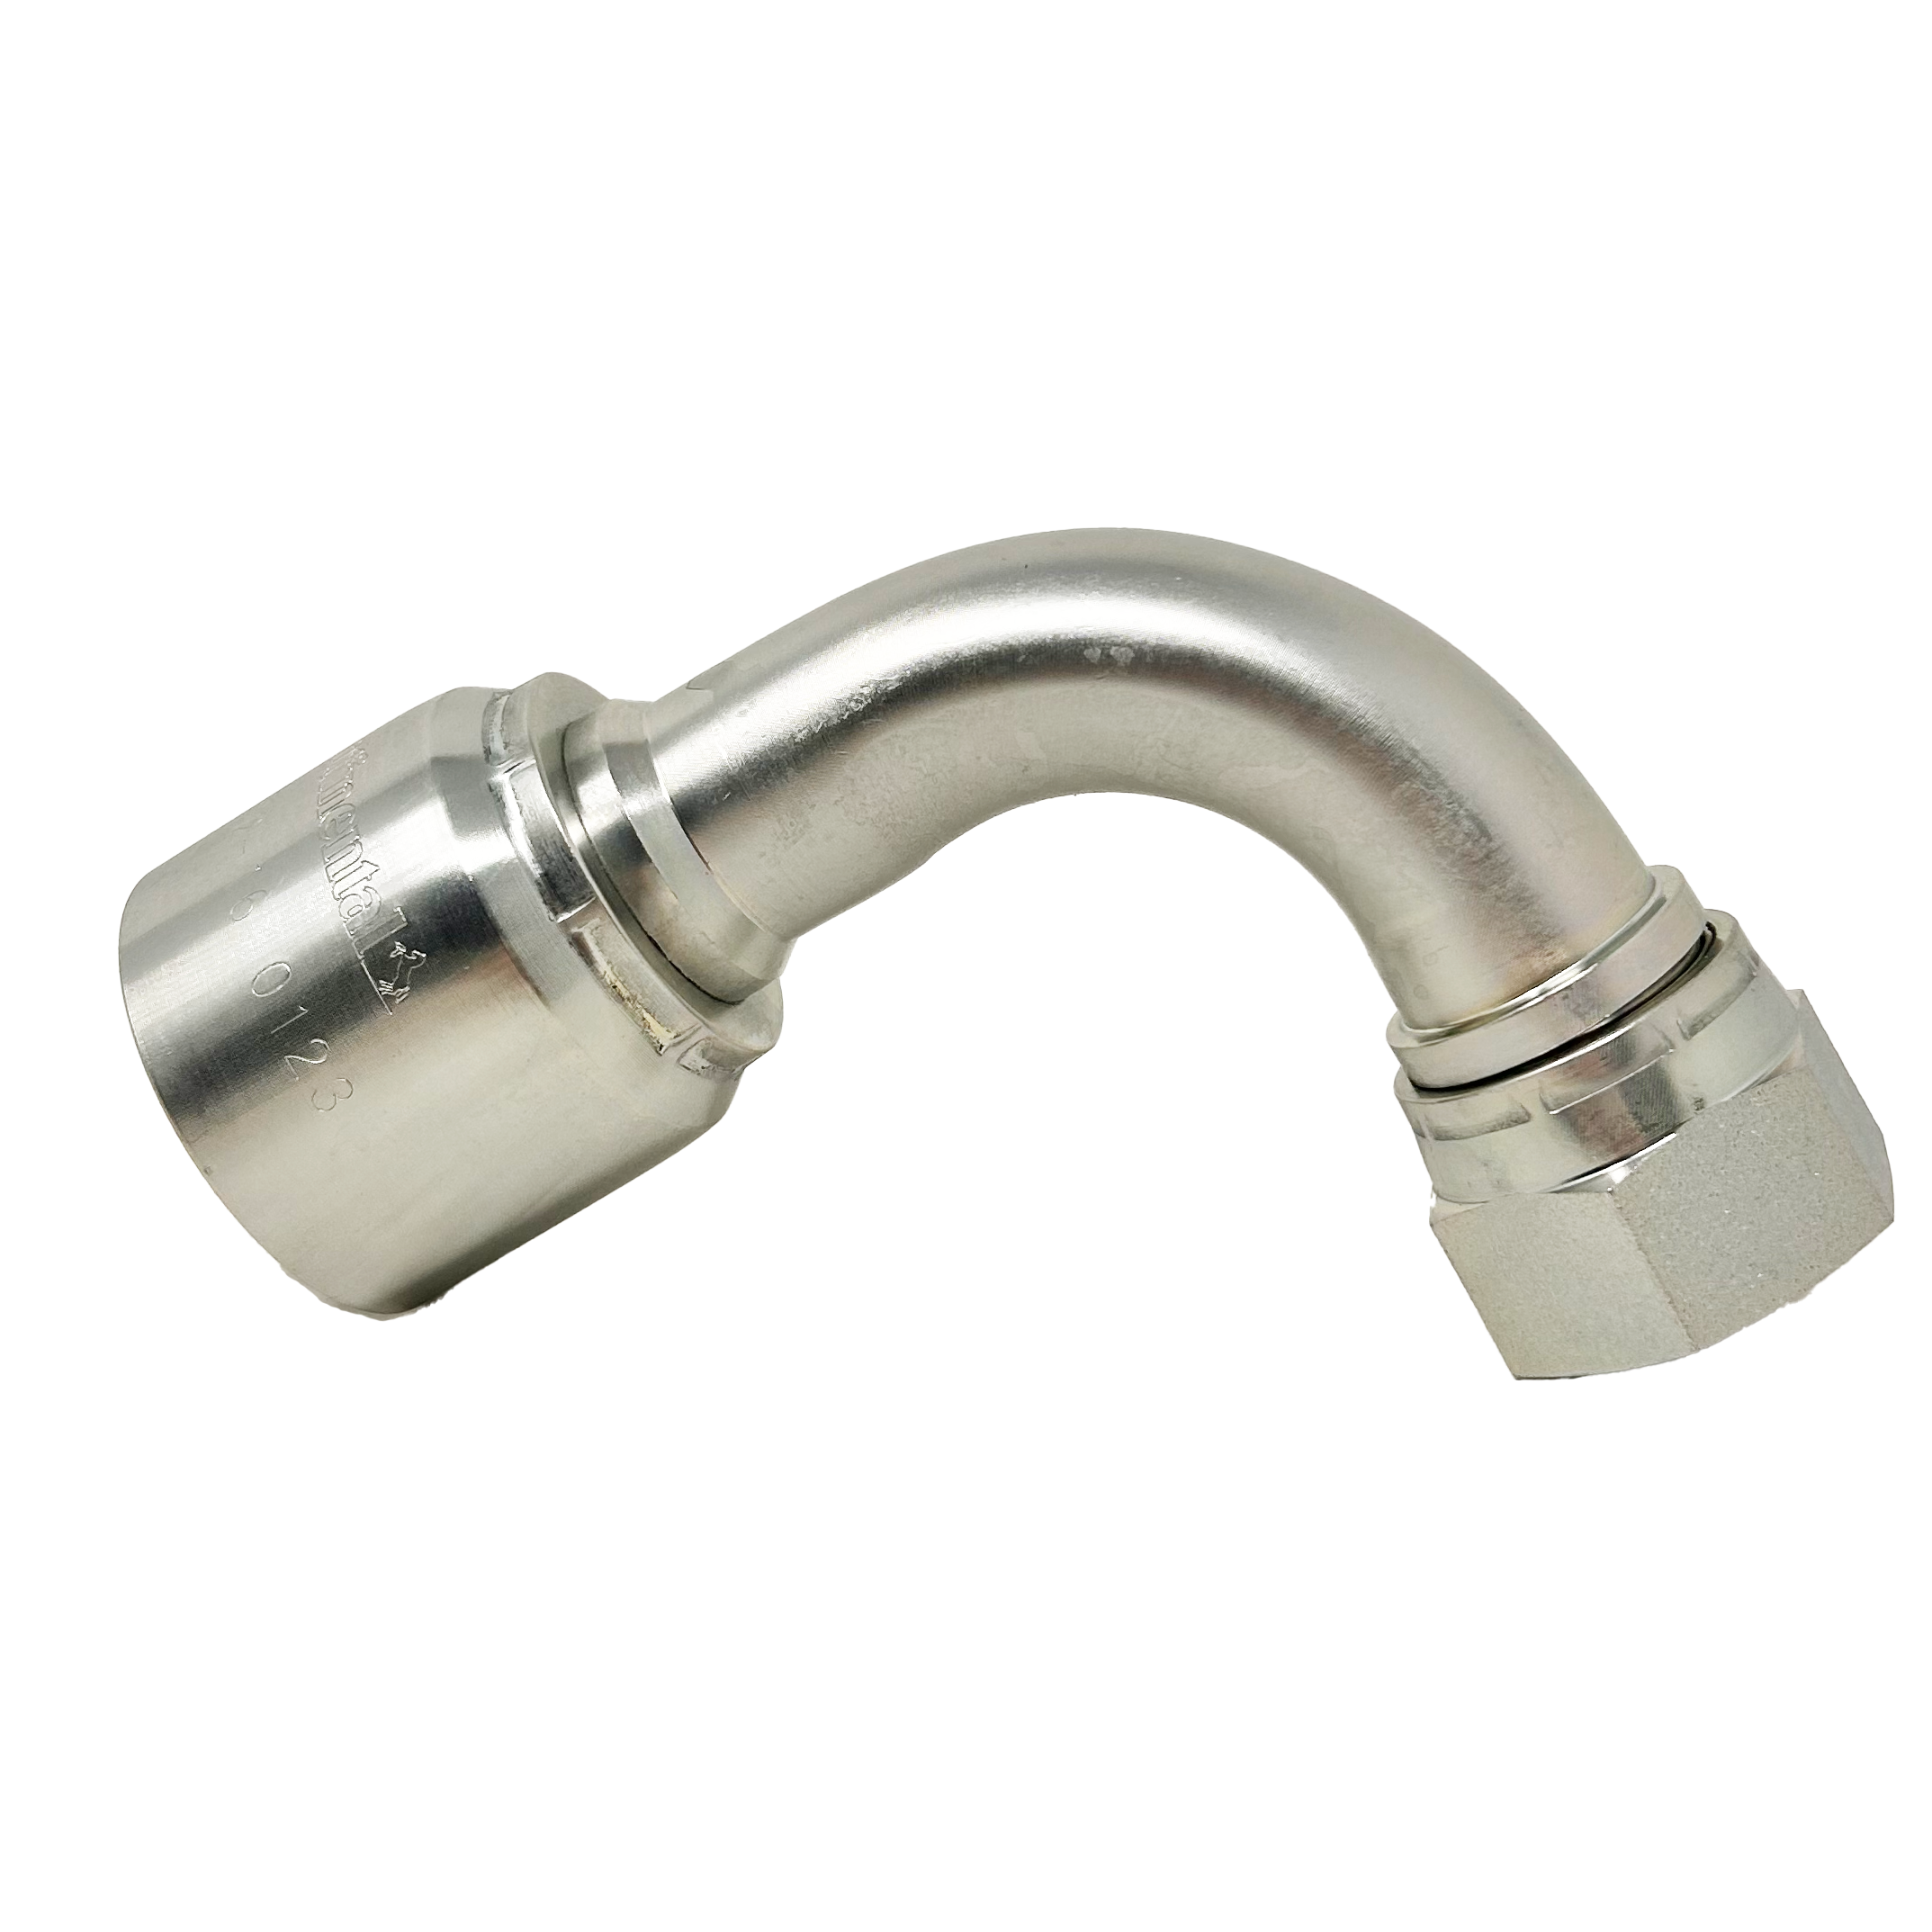 B2-JCFX90-0812: Continental Hose Fitting, 0.5 (1/2") Hose ID x 1-1/16-12 Female JIC, 90-Degree Swivel Connection